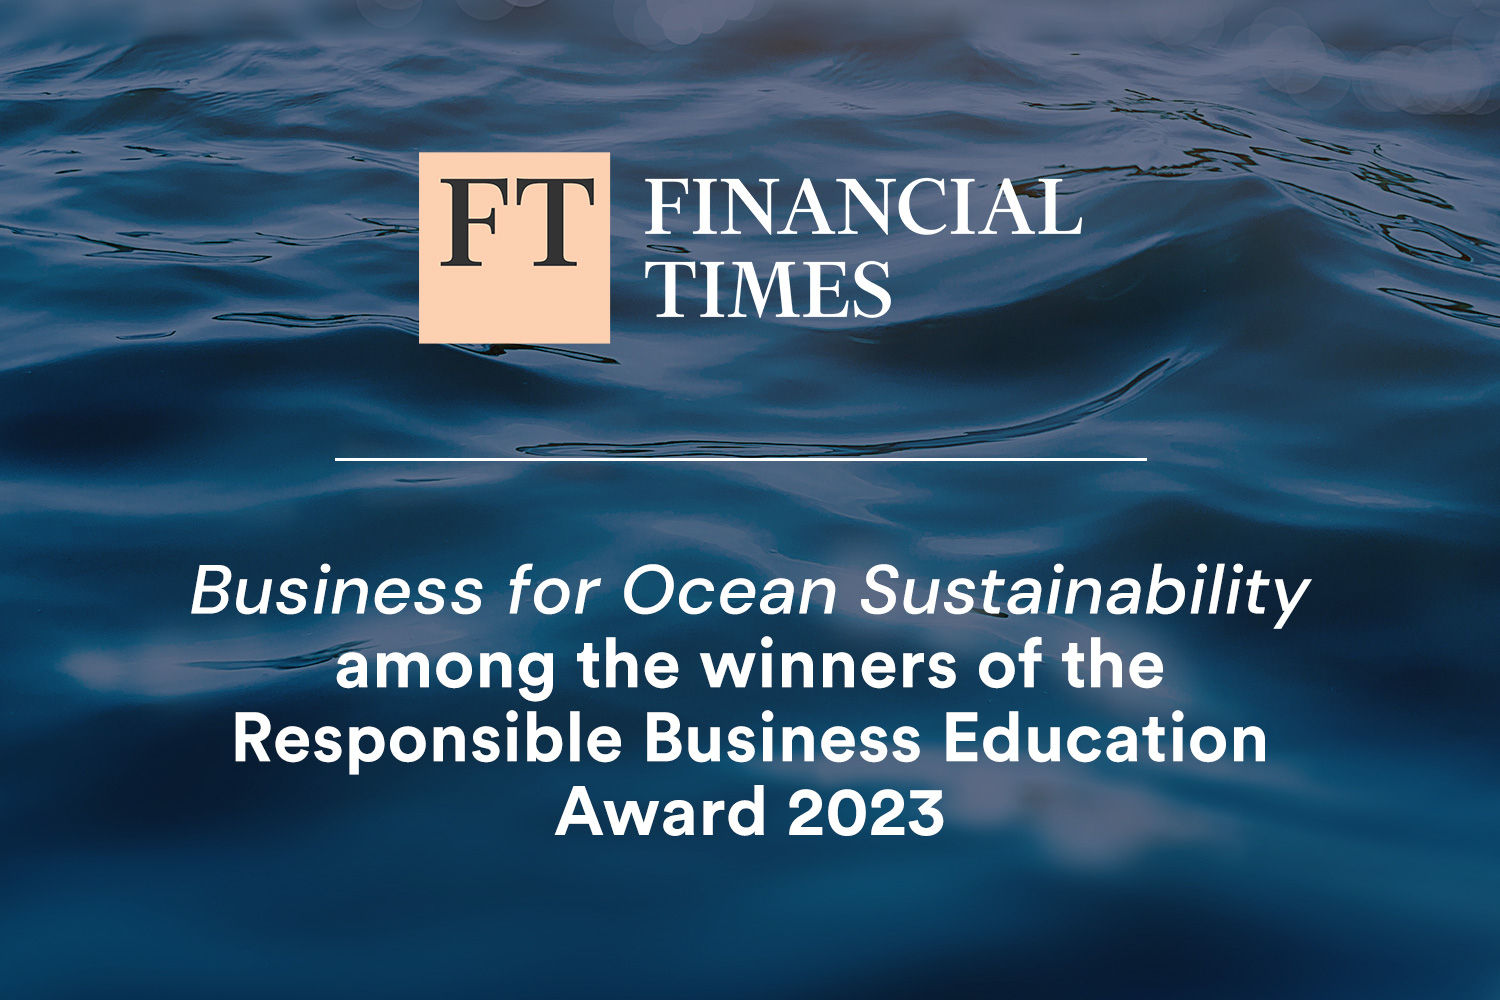 Business for Ocean Sustainability tra i vincitori del Responsible Business Education Awards 2023